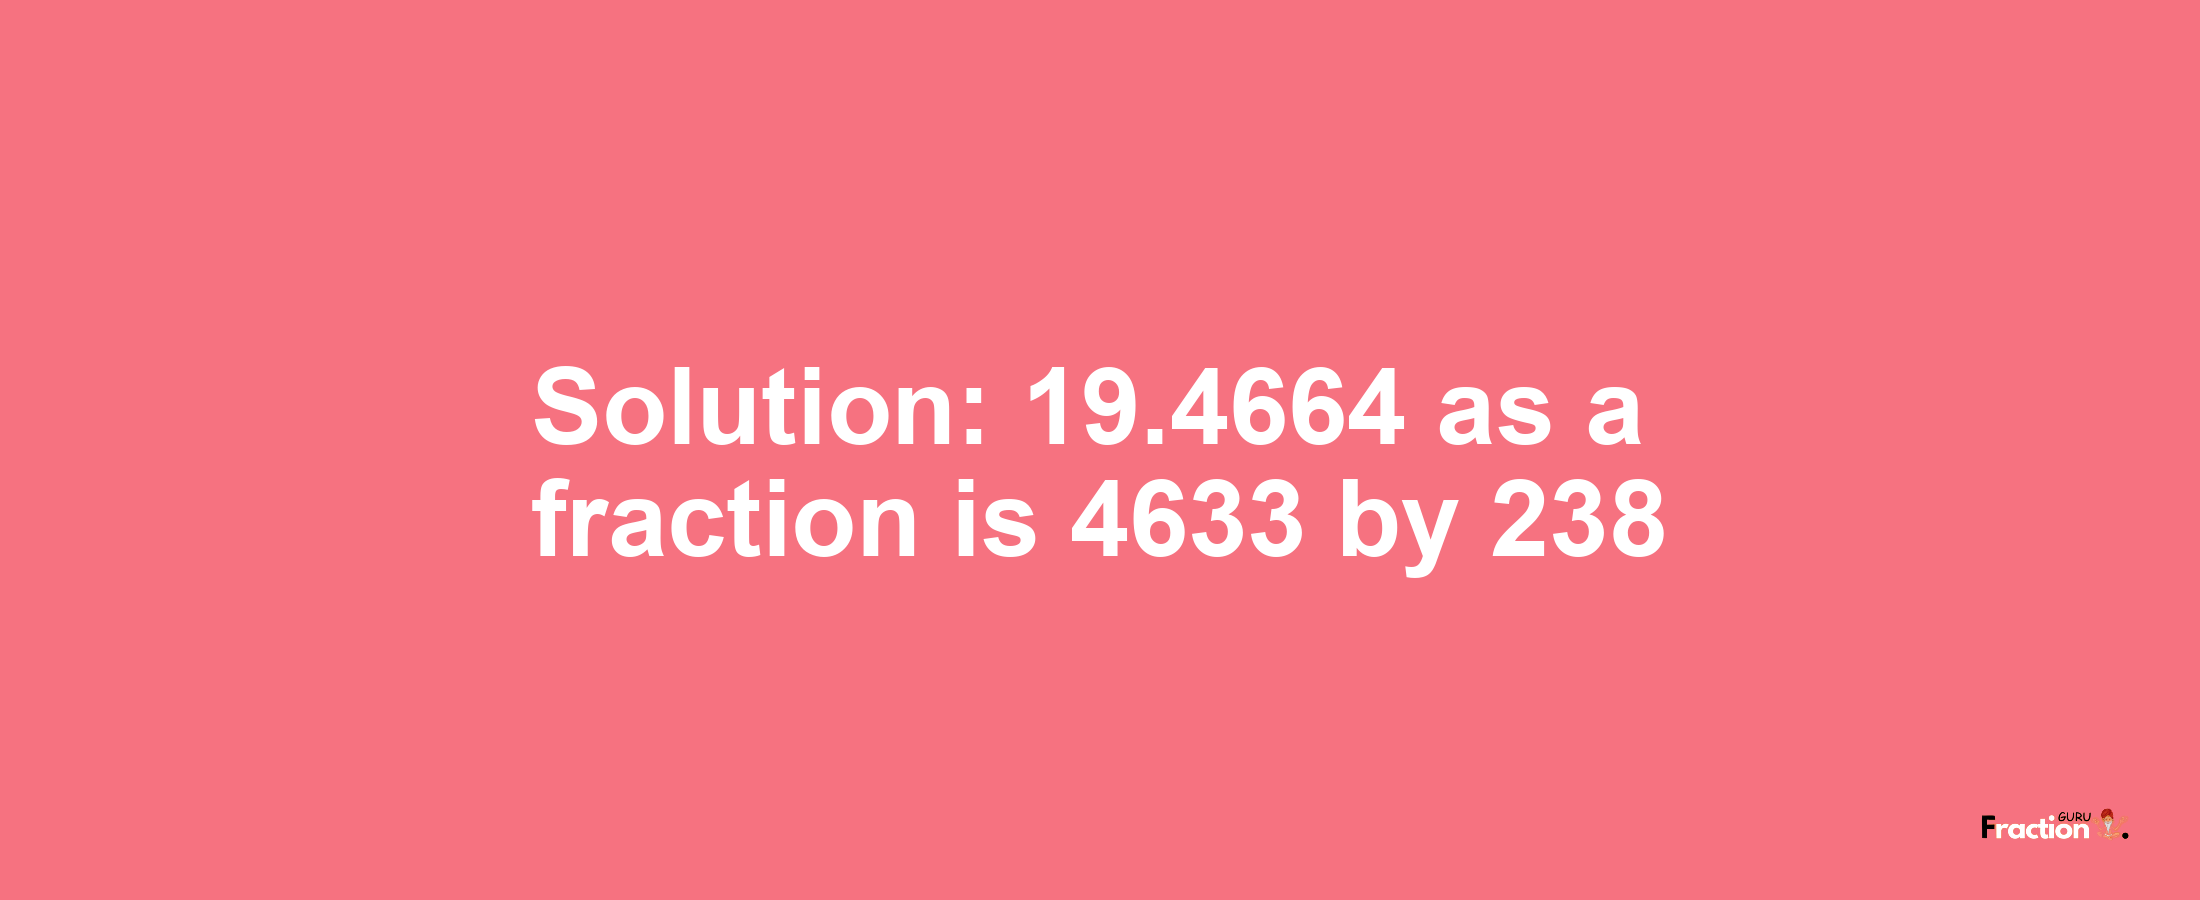 Solution:19.4664 as a fraction is 4633/238